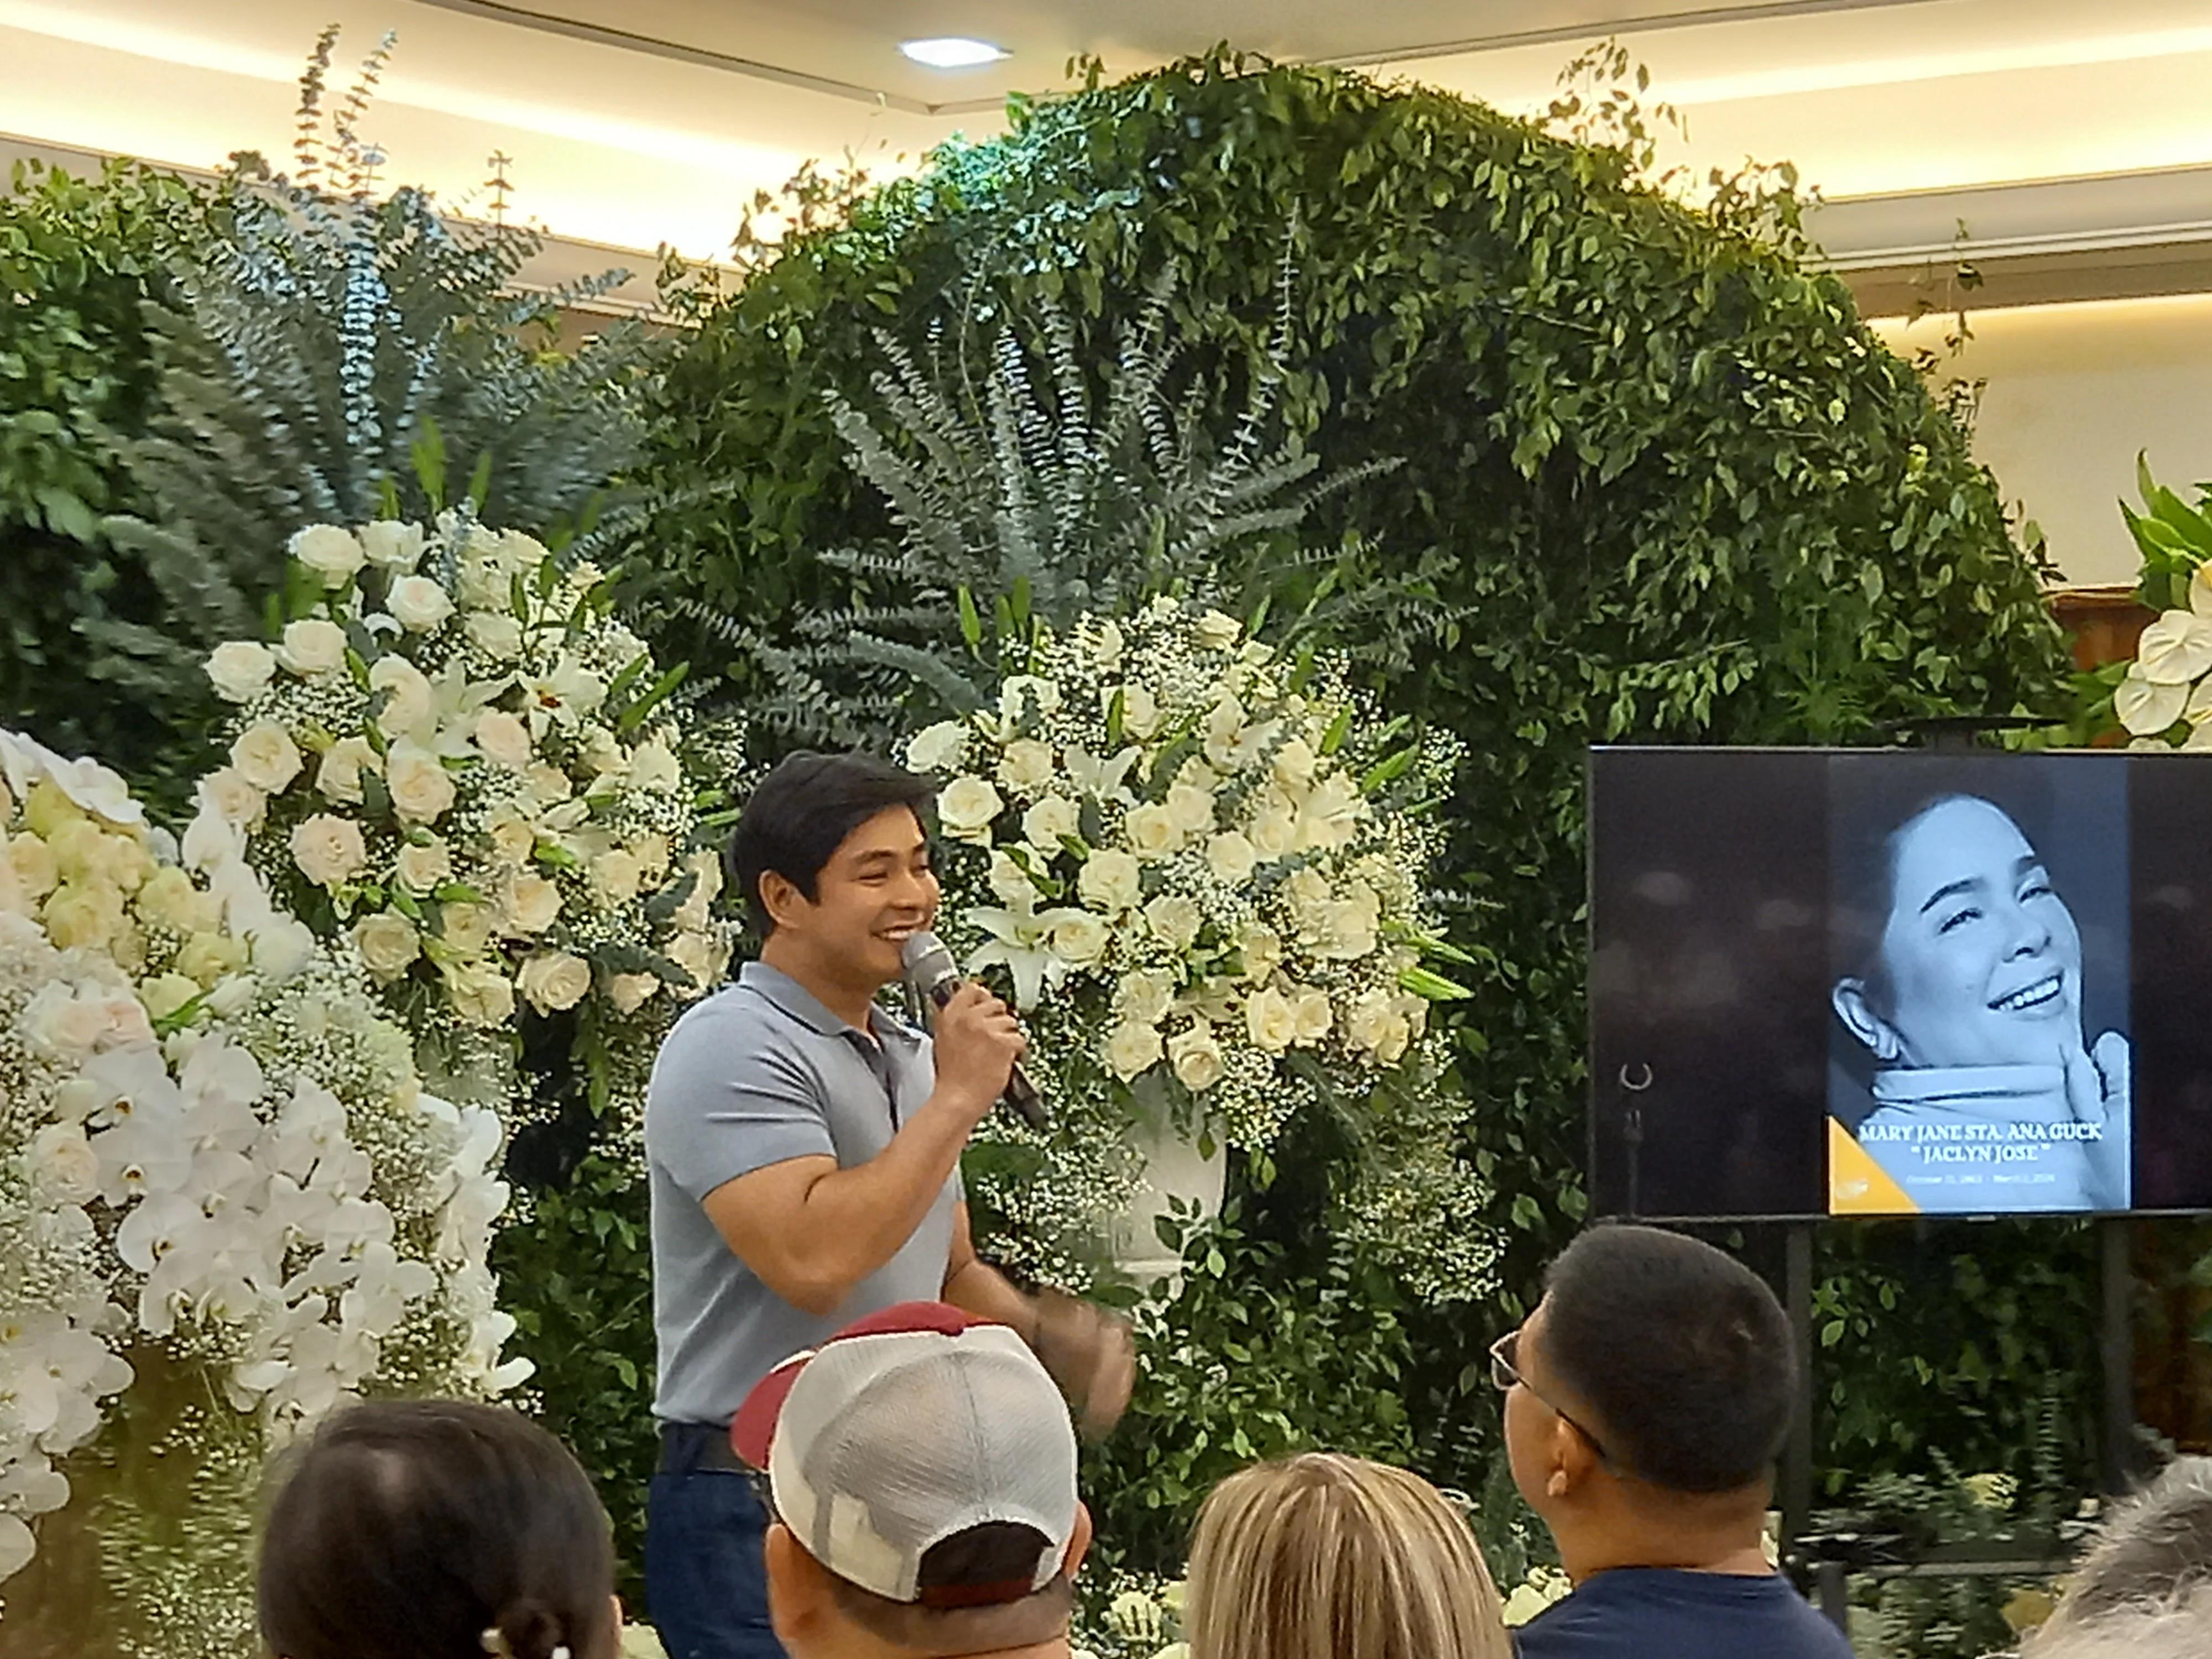 Coco Martin leads tributes to Jaclyn Jose